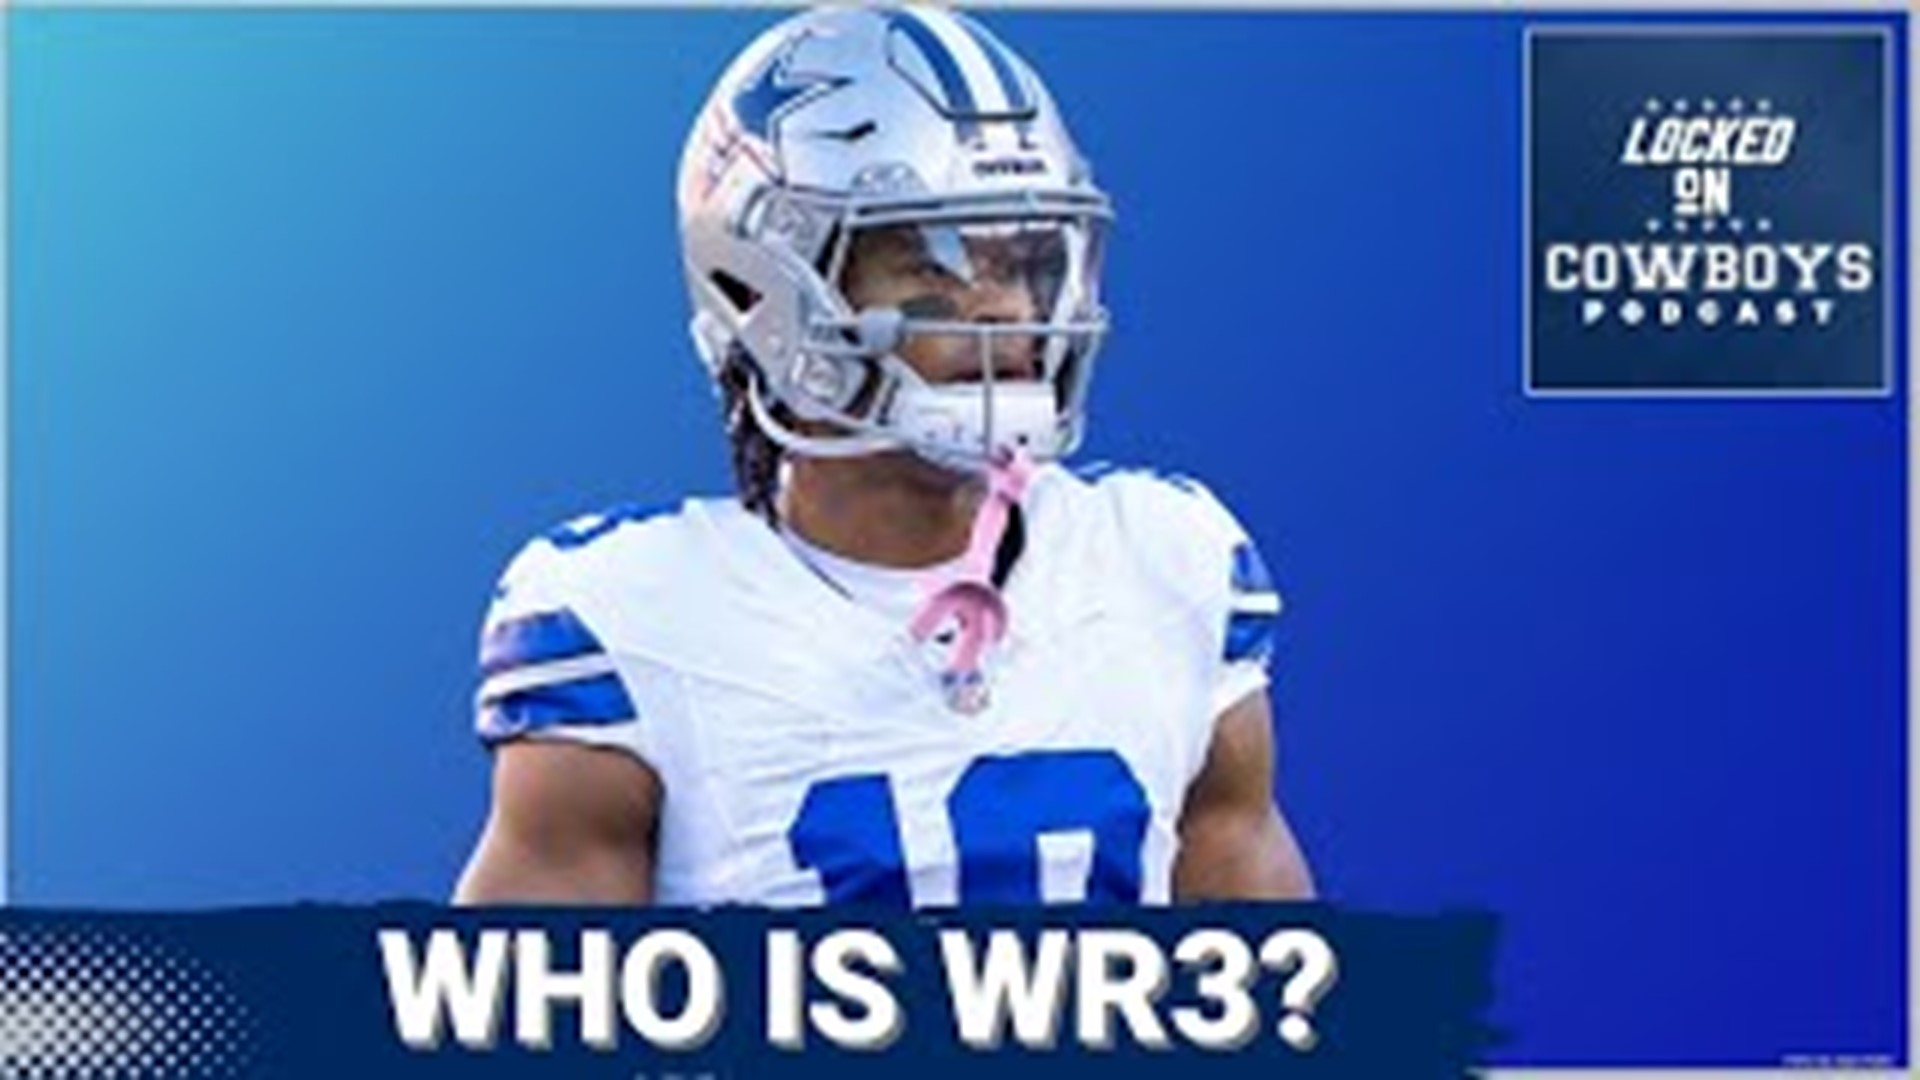 The Dallas Cowboys could be in need of wide receiver help this offseason if they release Michael Gallup. Is Jalen Tolbert ready to step up to be the No. 3 receiver?